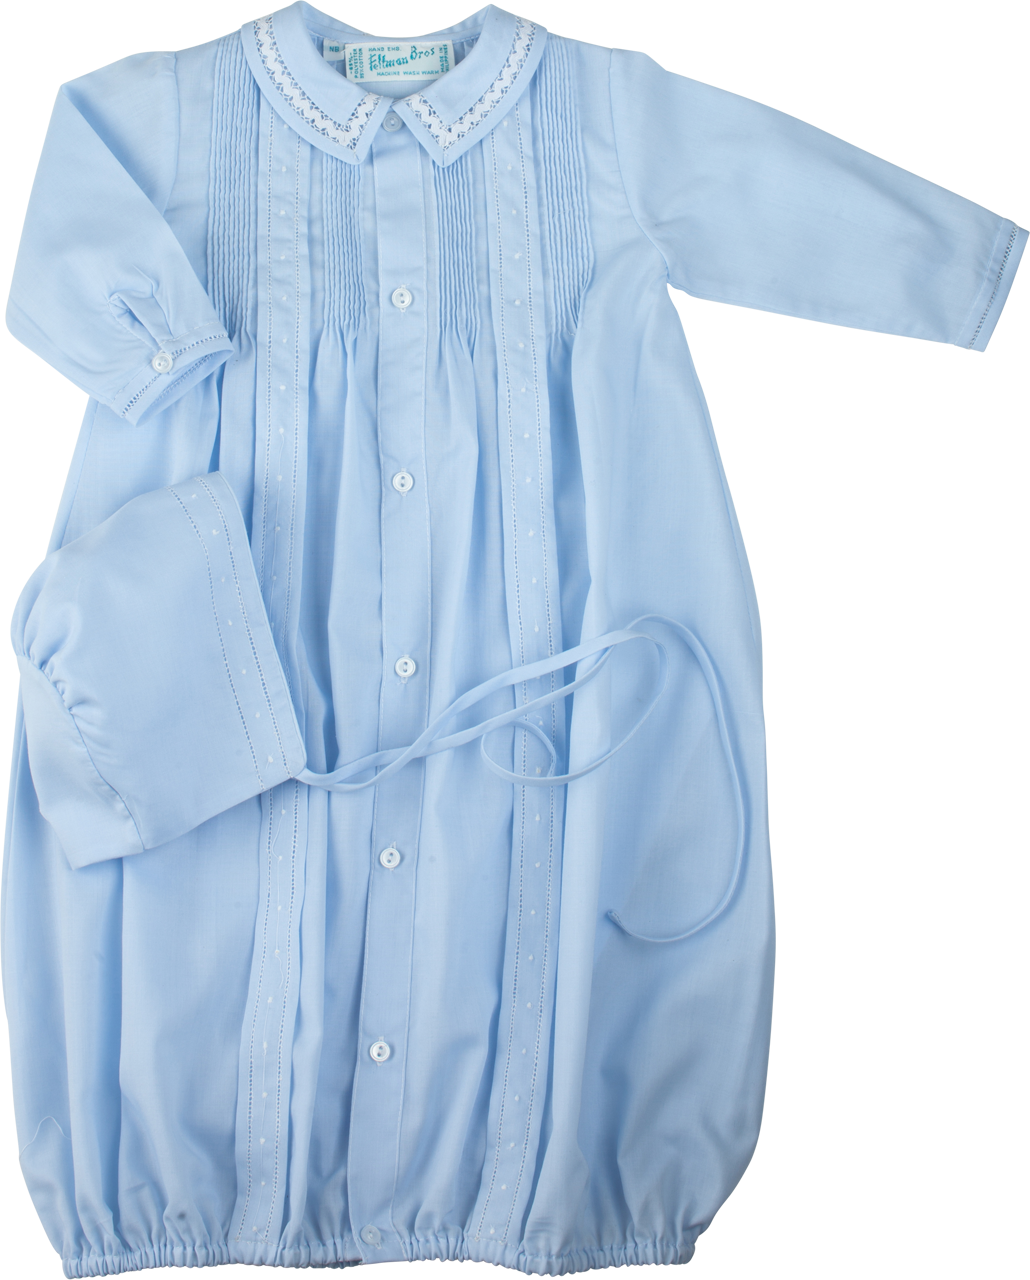 Boys Blue Take-Me-Home Gown & Hat